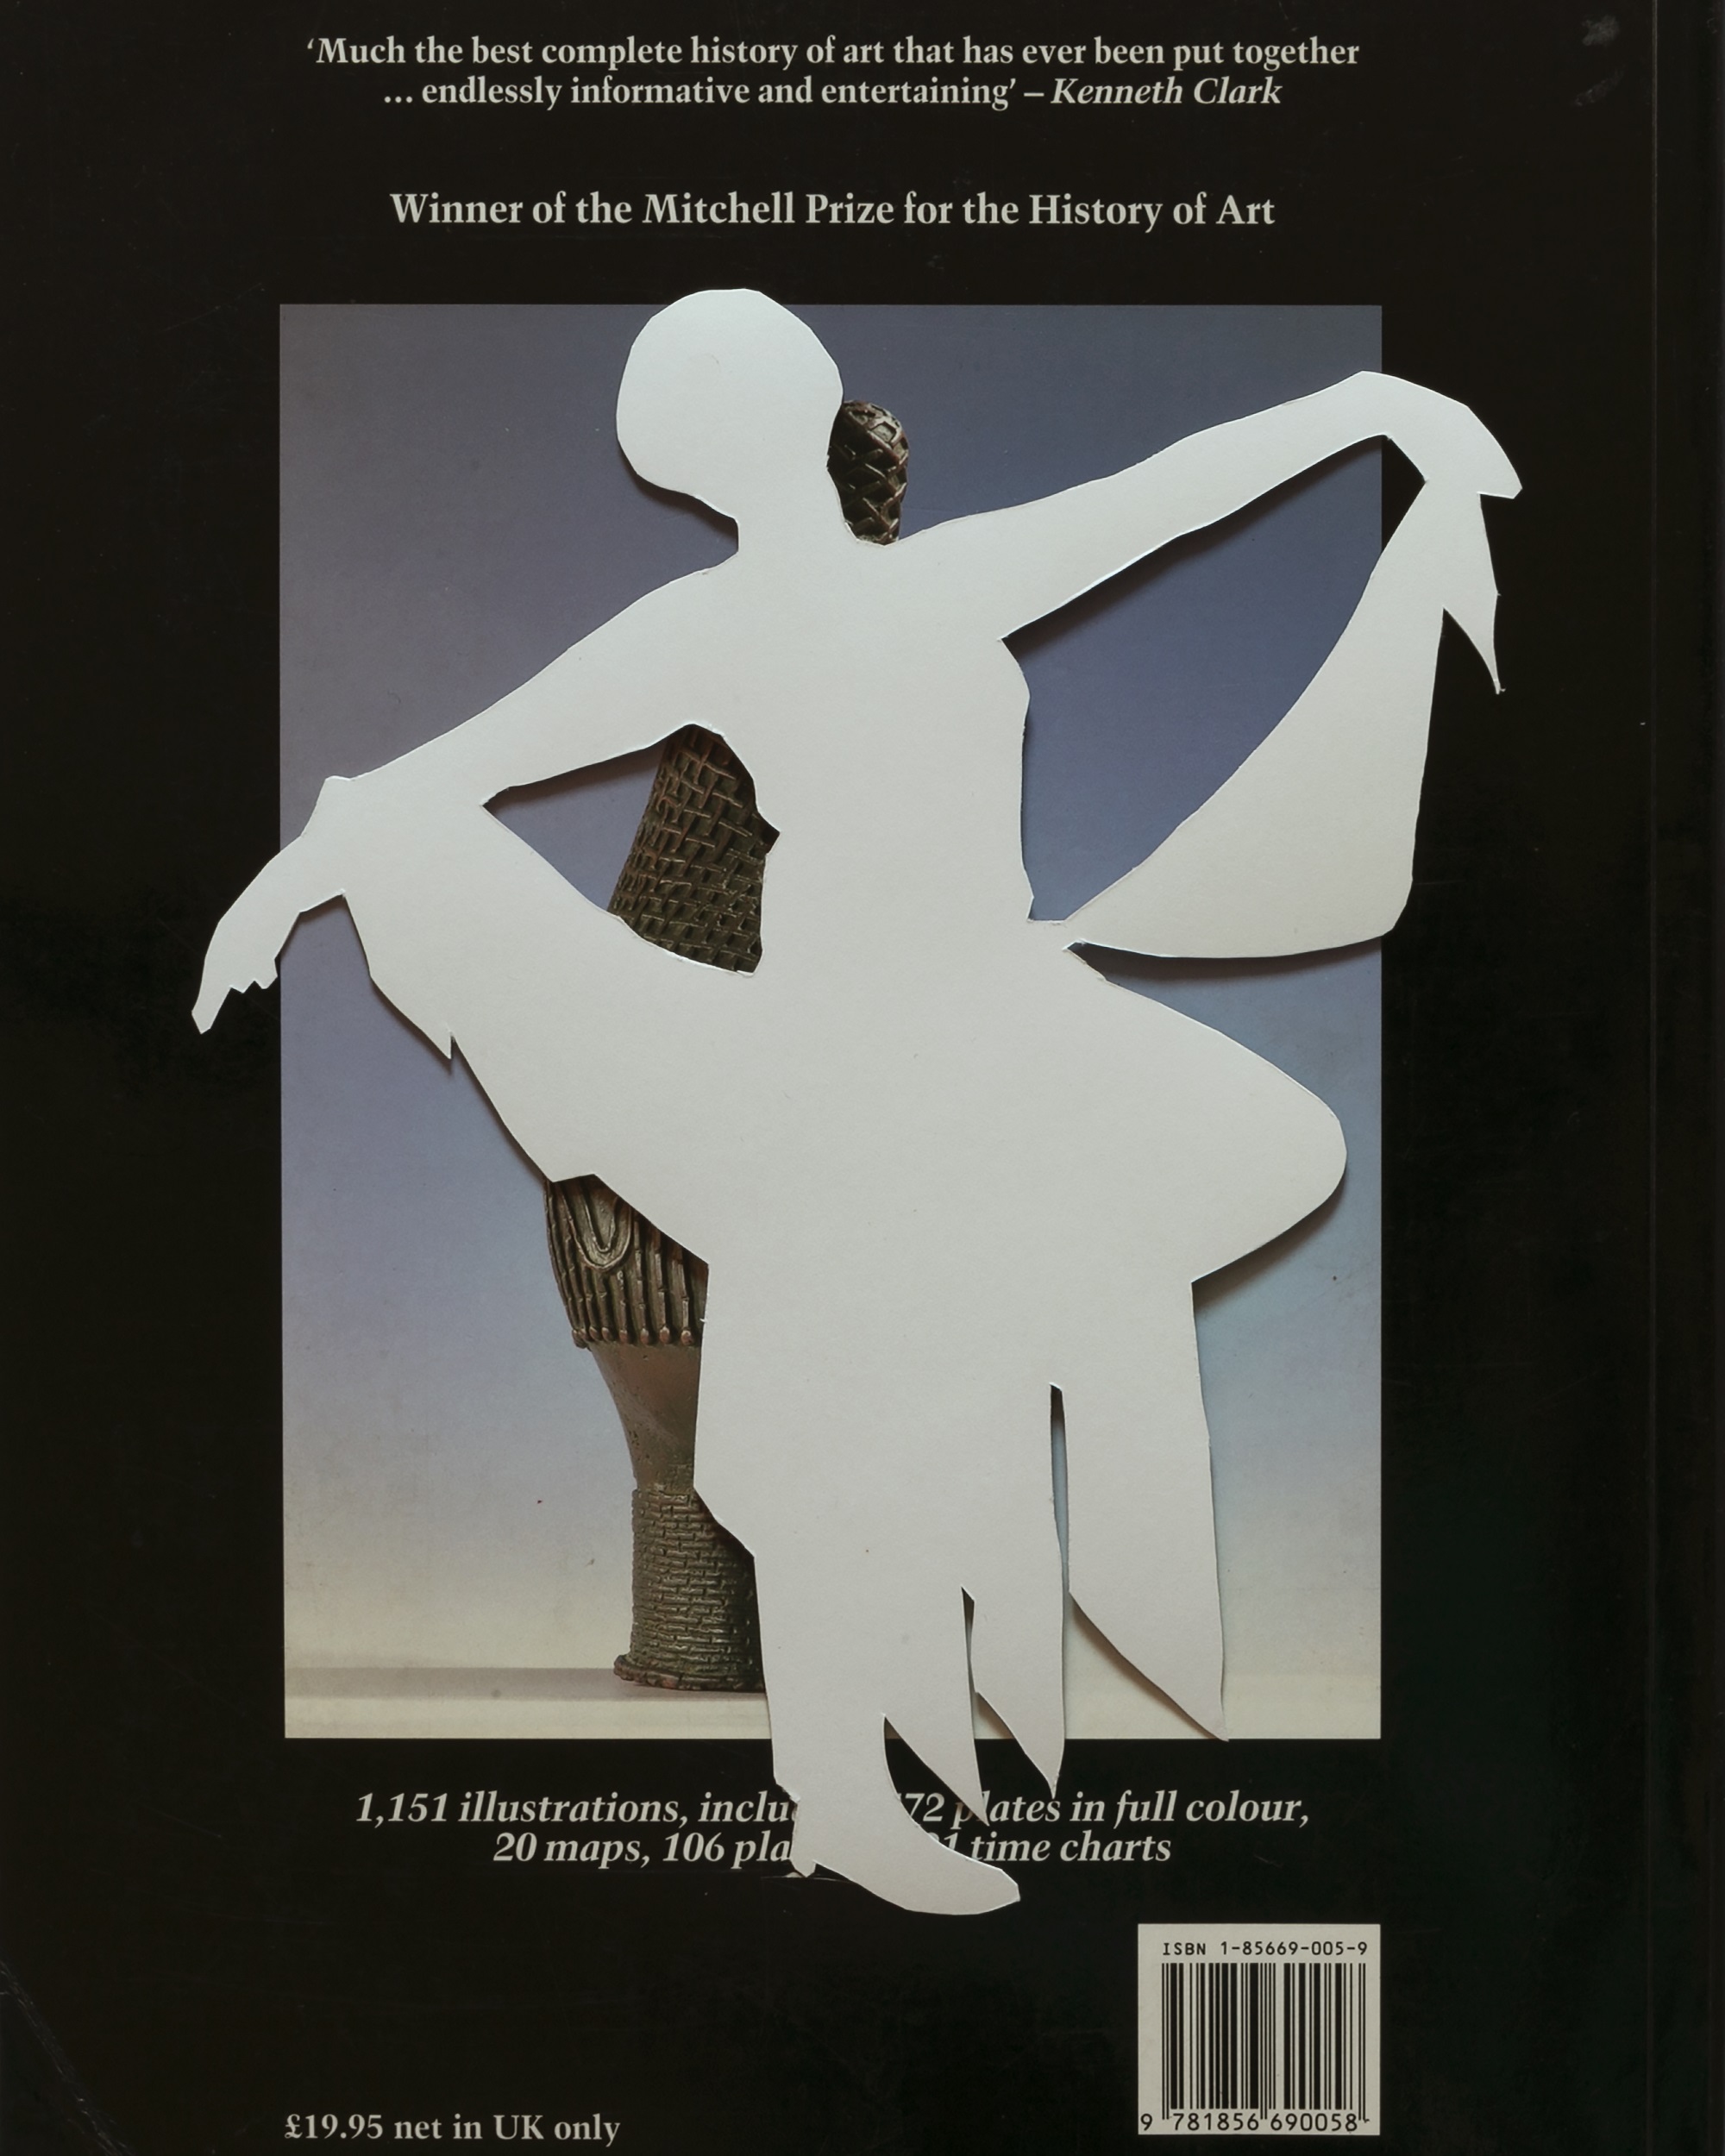 White, silhouetted image of a woman with her arms outstretched, holding up her overskirts, superimposed on the back of an academic art text that reads, in part, "Much the best complete history of art that has ever been put together...endlessly informative and entertaining. —Kenneth Clark."